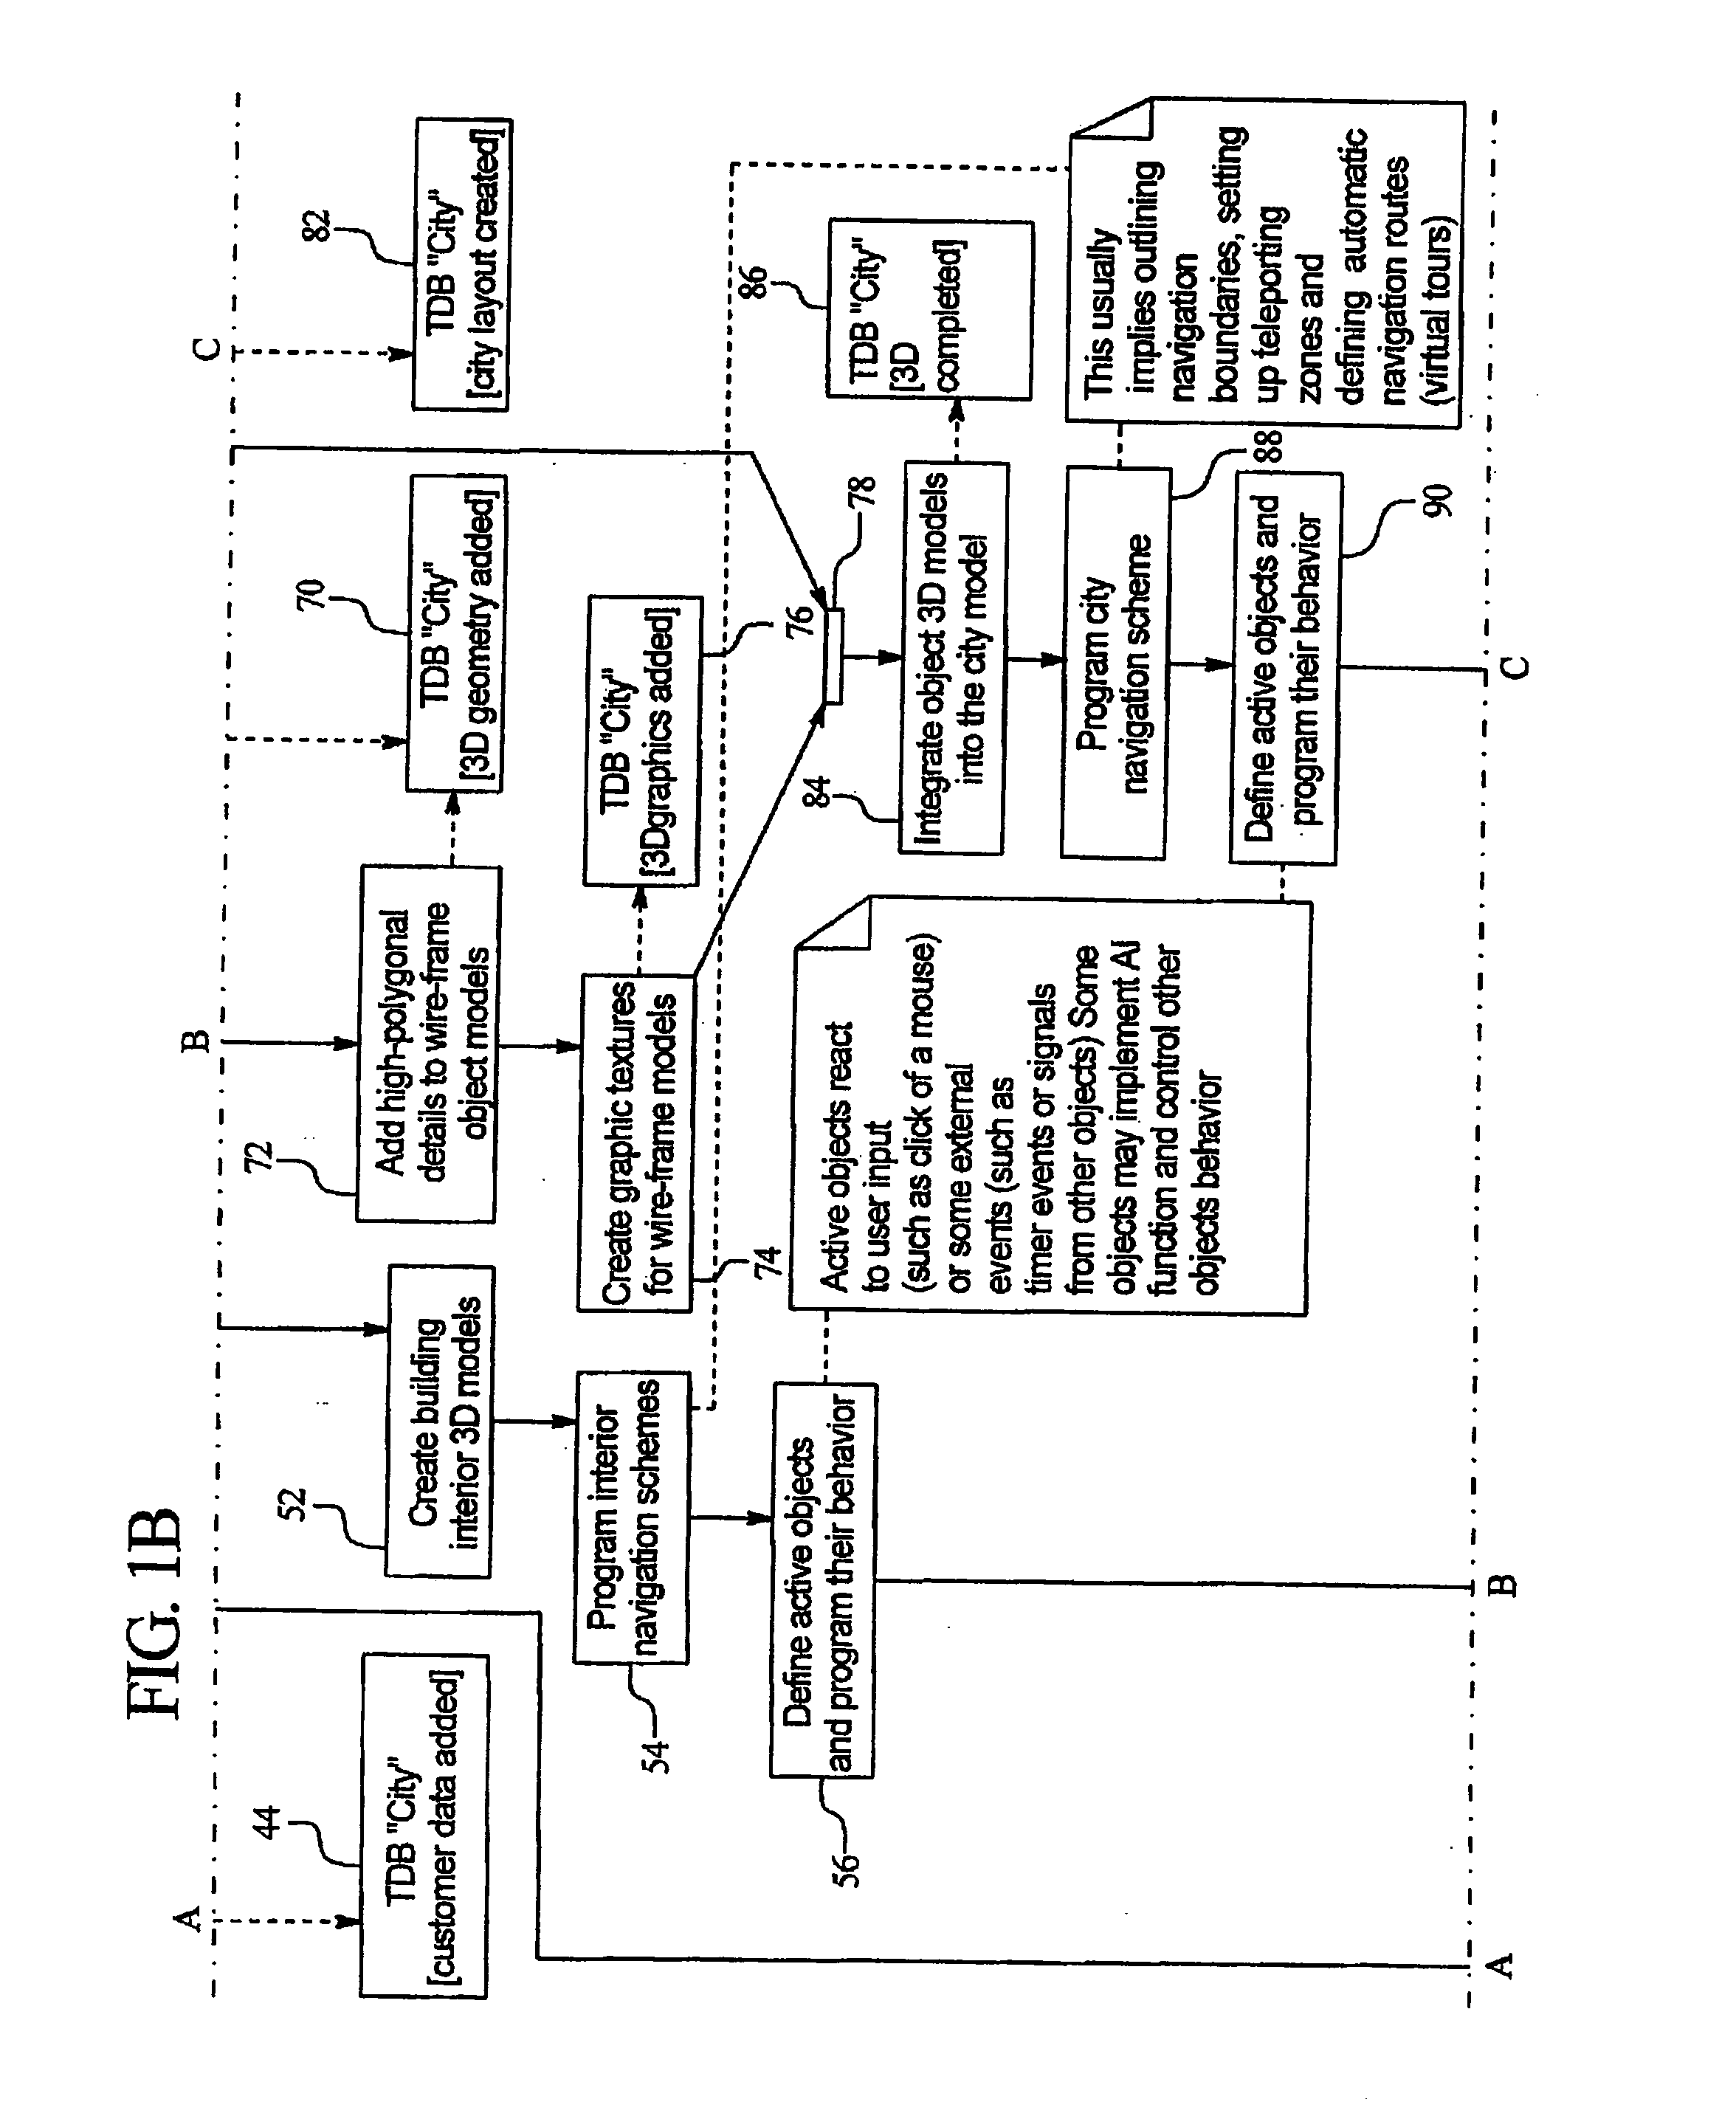 System and method for minimizing the amount of data necessary to create a virtual three-dimensional environment